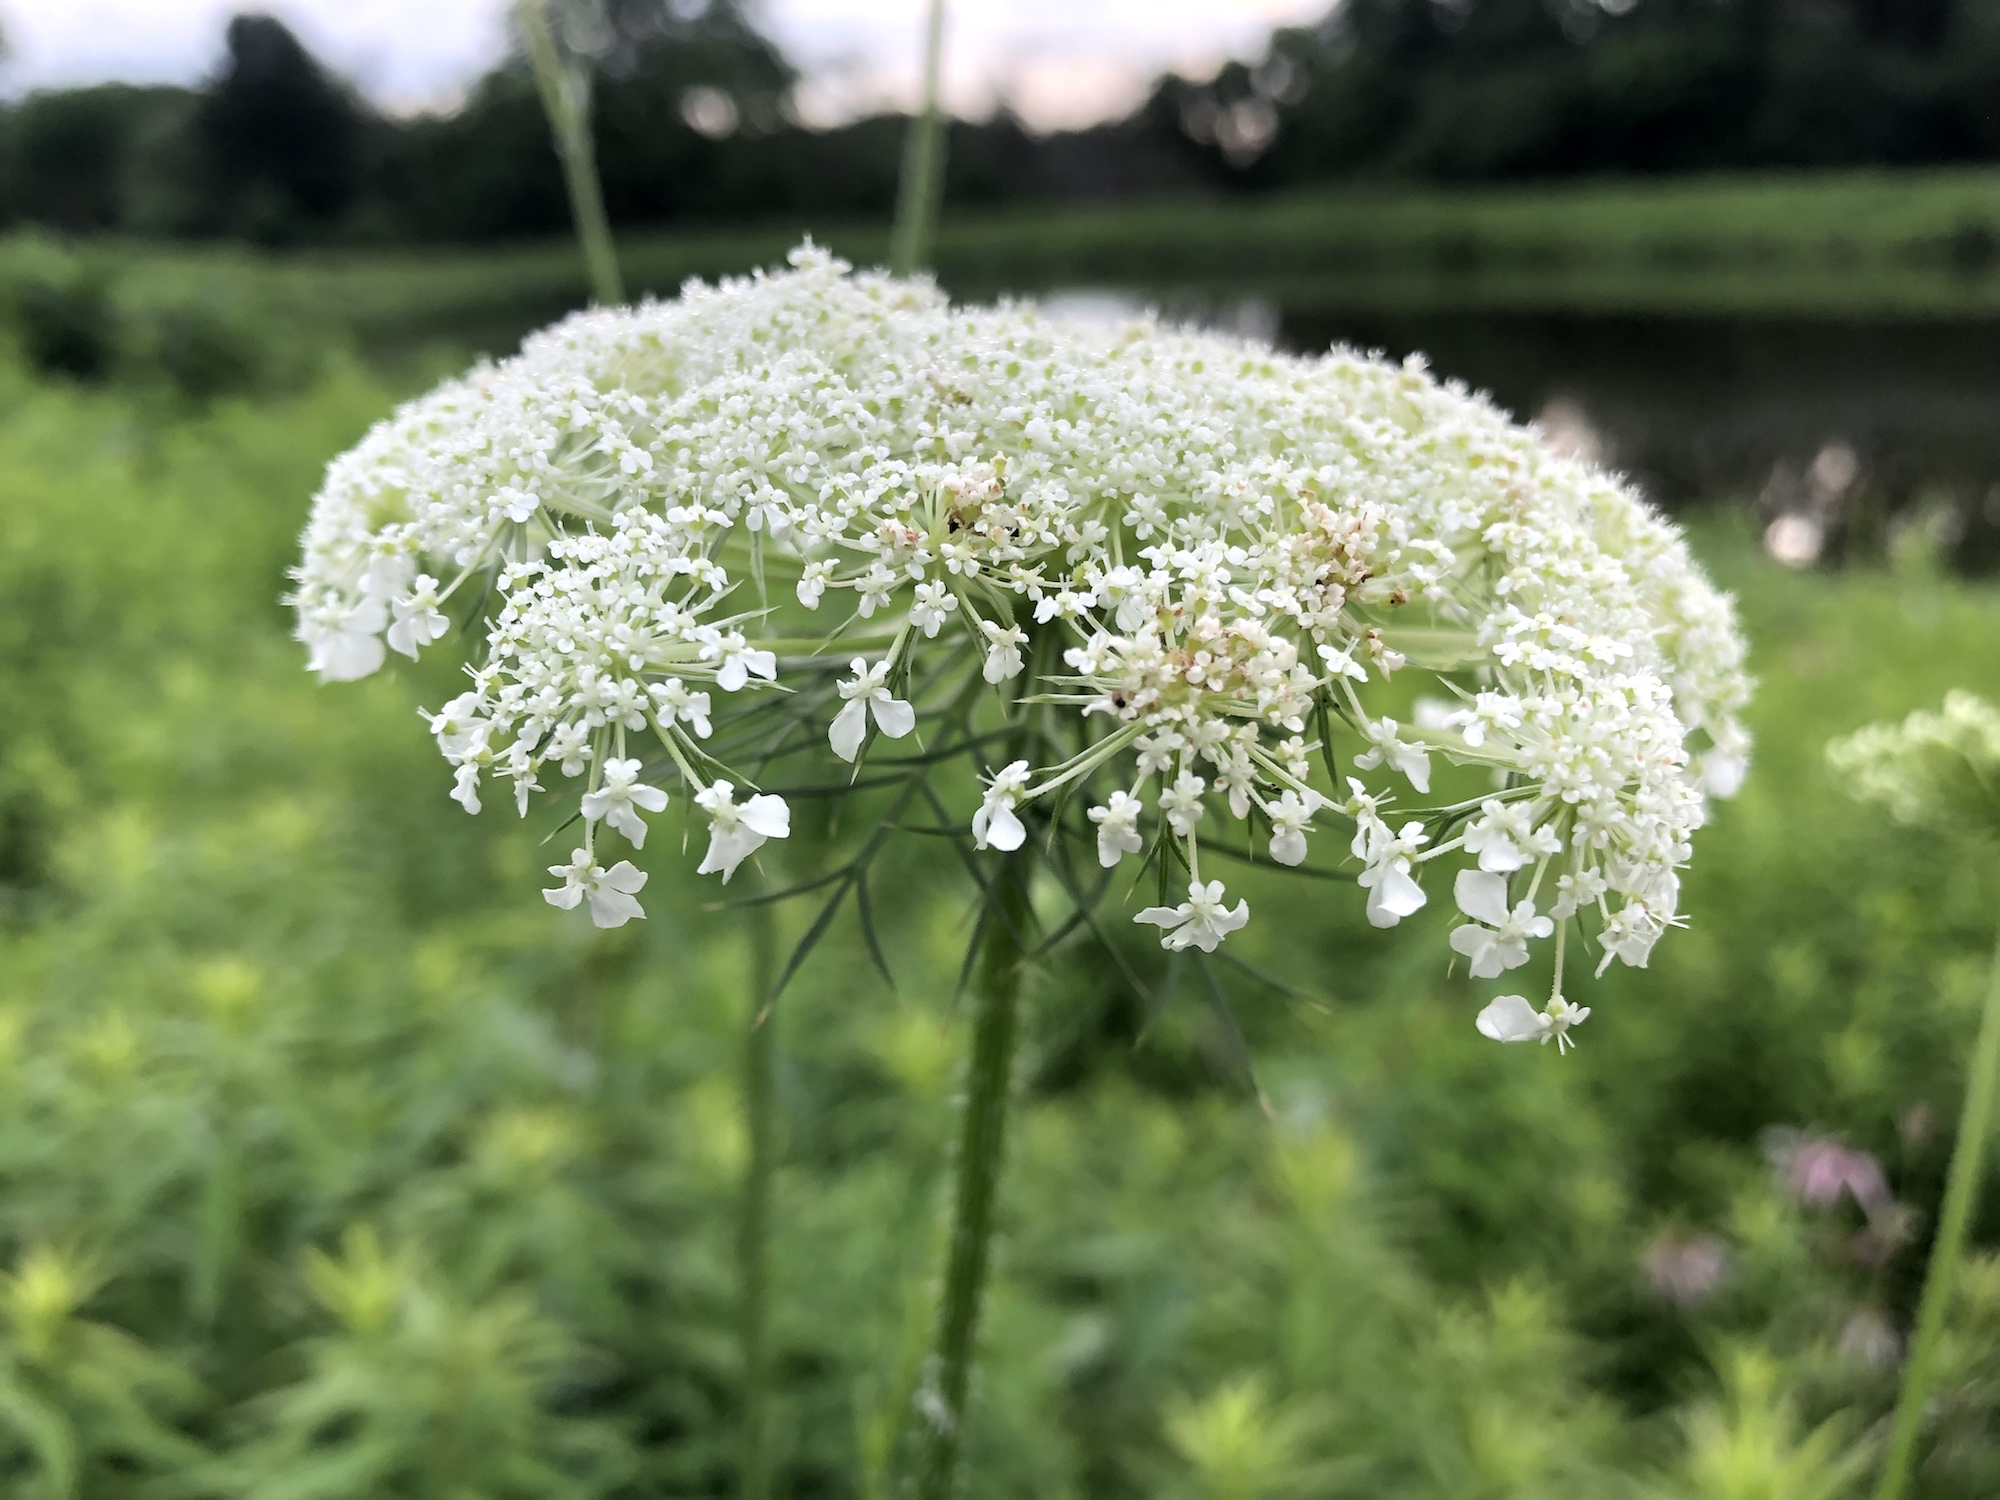 Queen Anne's Lace on bank of retaining pond on the corner of Nakoma Road and Manitou Way in Madison, WI on July 1, 2019.